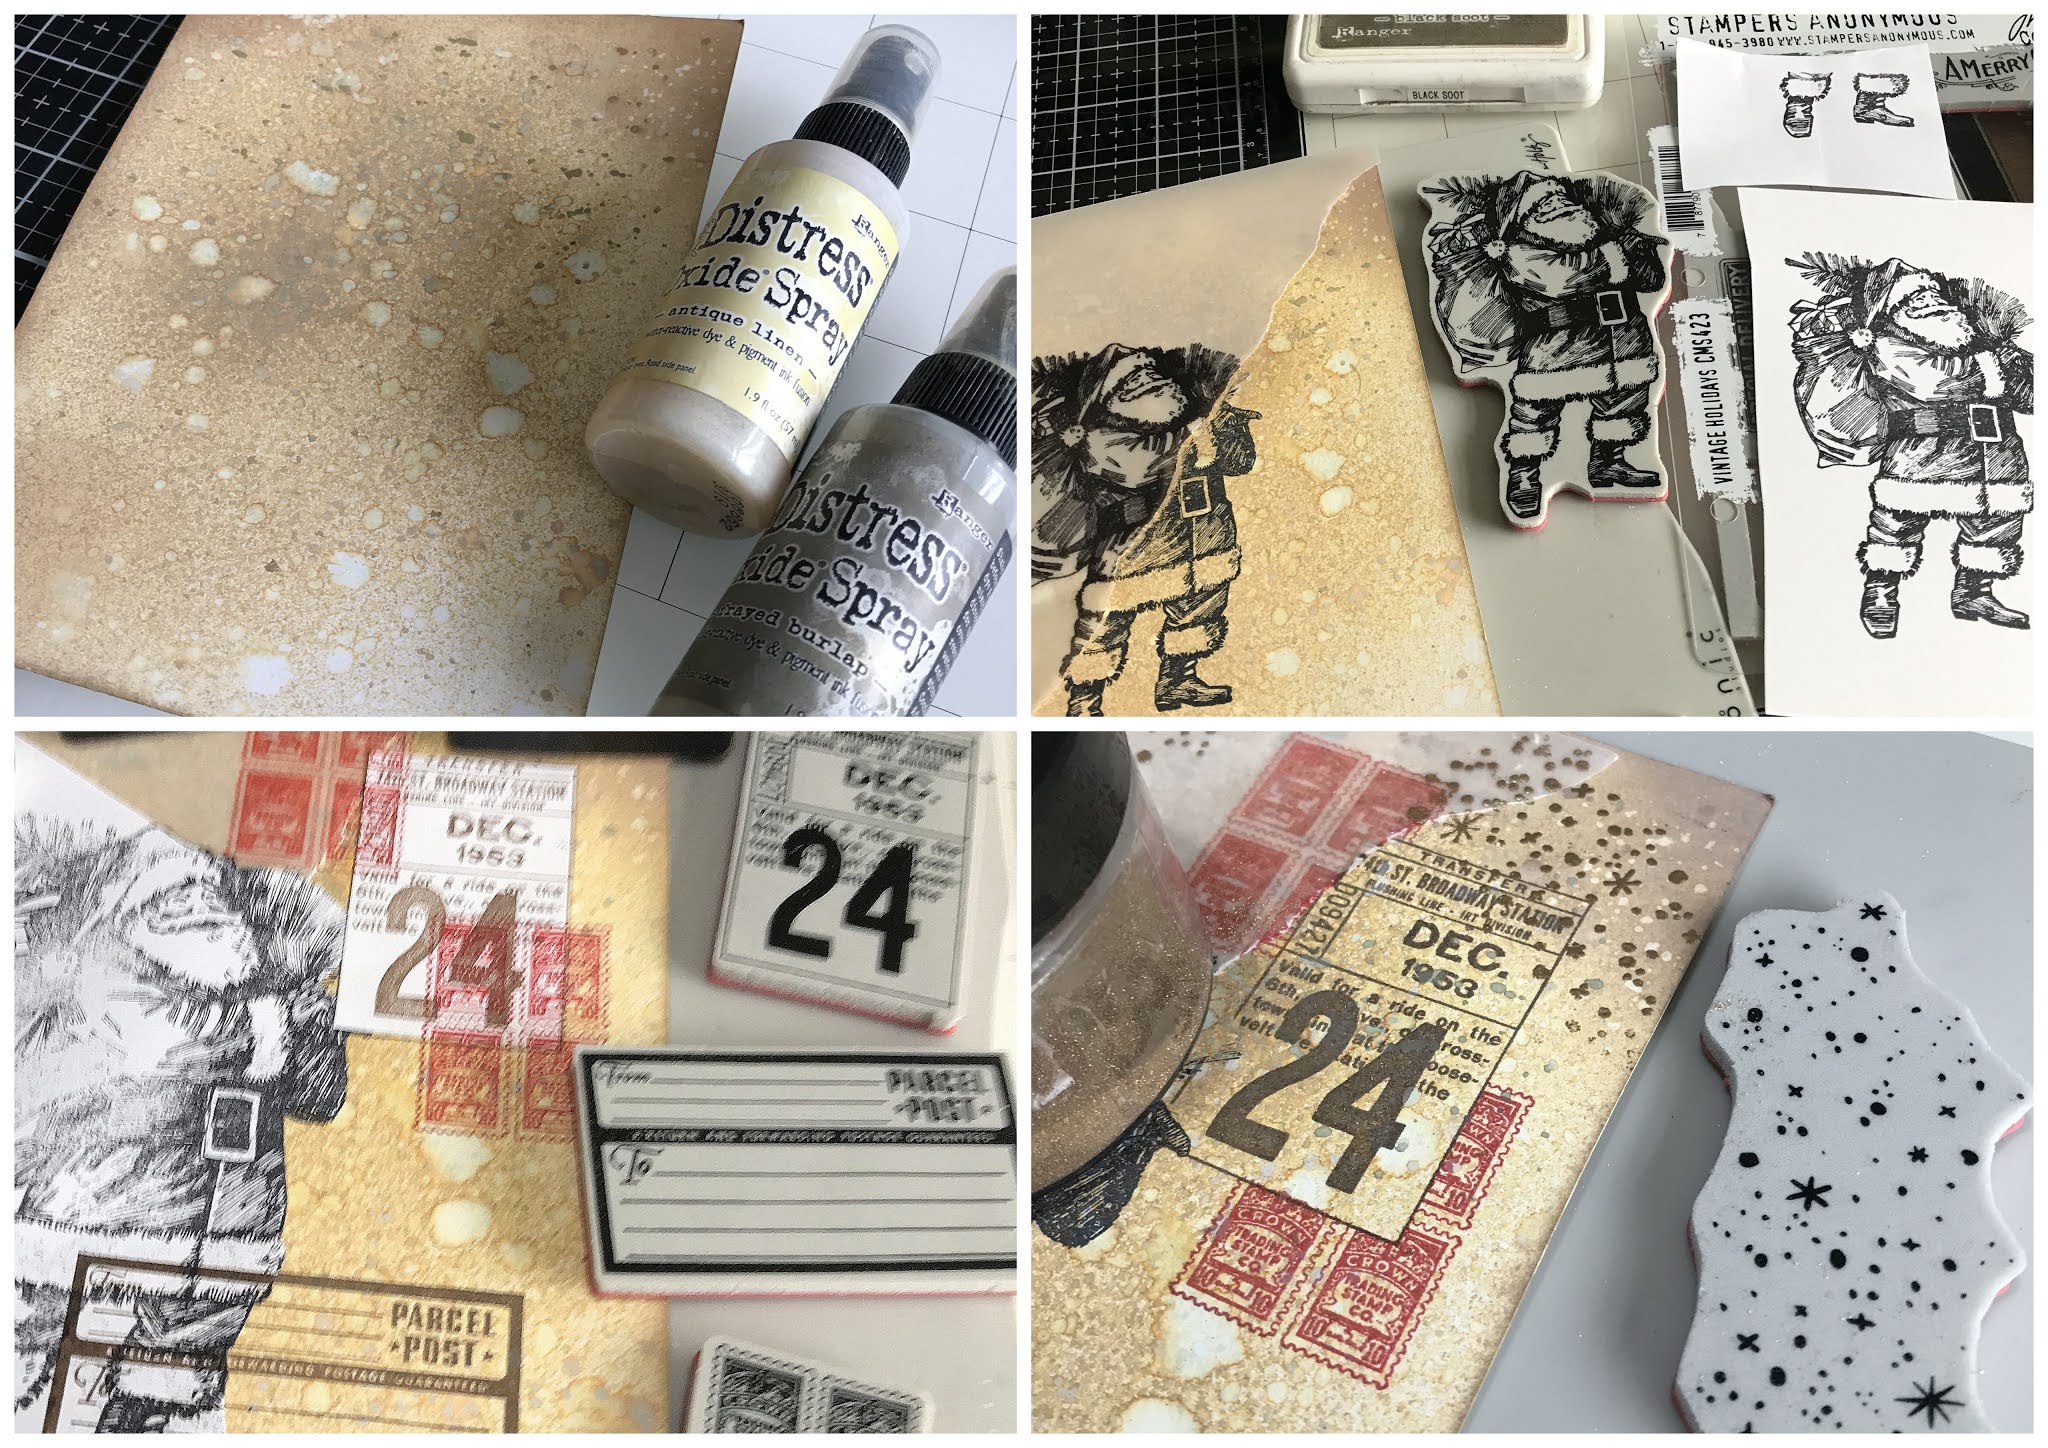 Kath's Blogdiary of the everyday life of a crafter: Tim  Holtz/Stampers Anonymous - Vintage Holidays